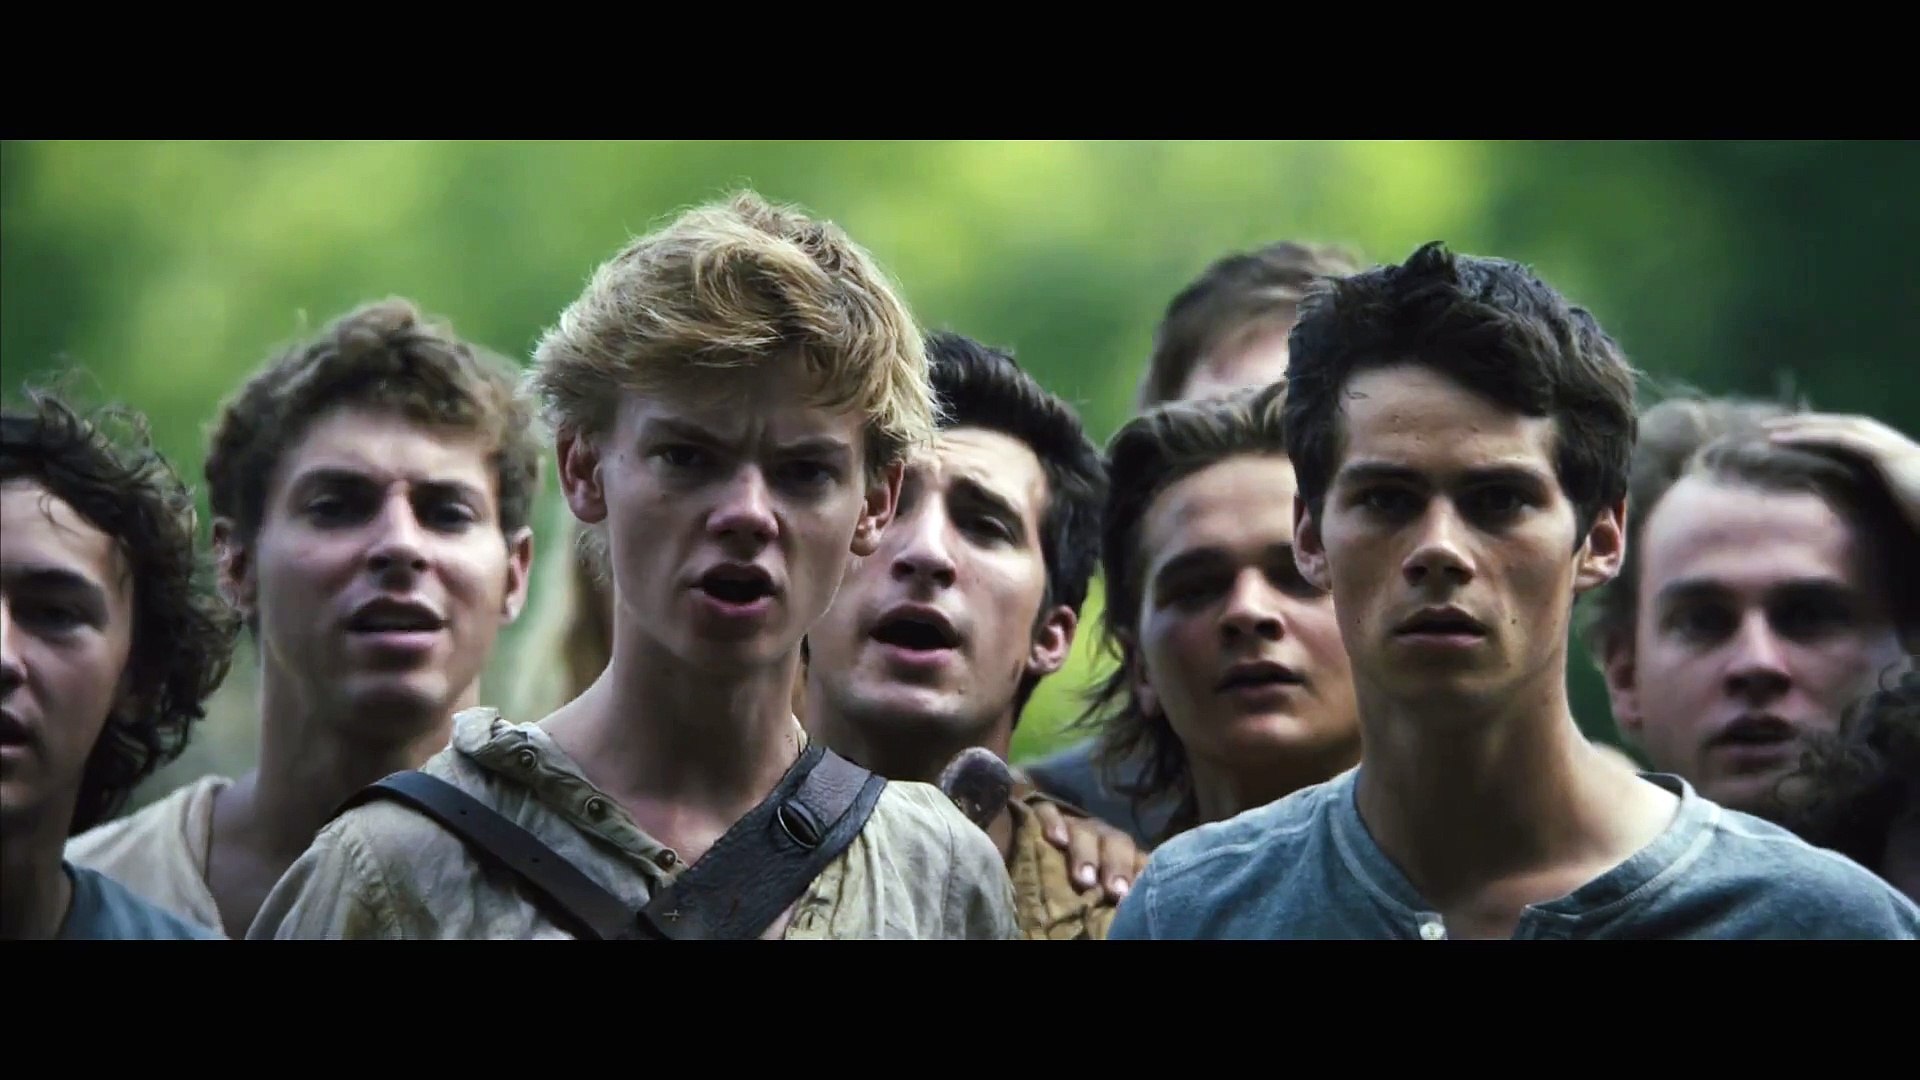 THE MAZE RUNNER Clip - -Thomas Goes Into The Maze- (2014) - video